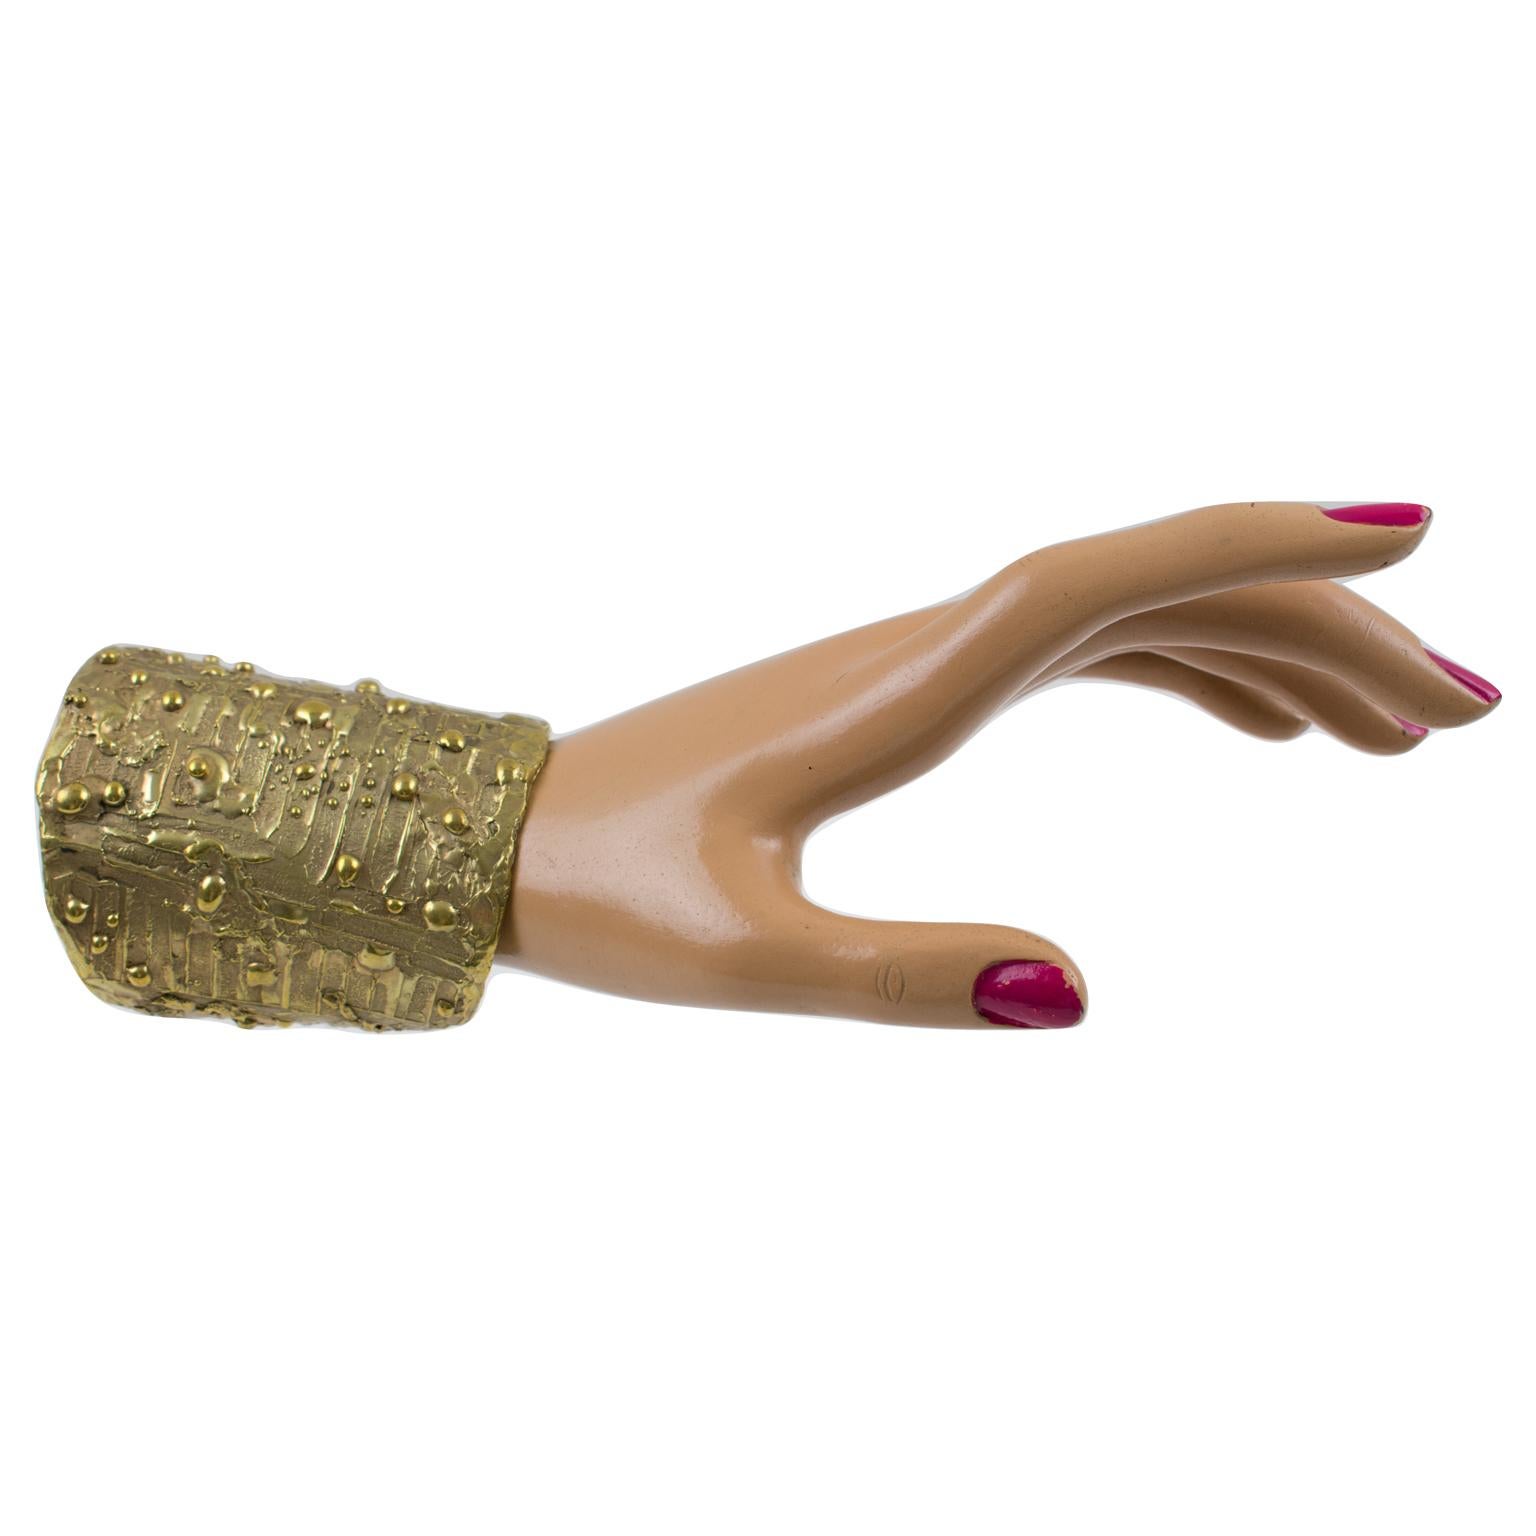 Striking modernist brass cuff bracelet by French designer studio. Chunky massive oversized hand-made bangle with brutalist carving and organic feel design. No visible maker's mark.
Measurements: inside across is 2.32 in. diameter (5.8 cm) - Opening